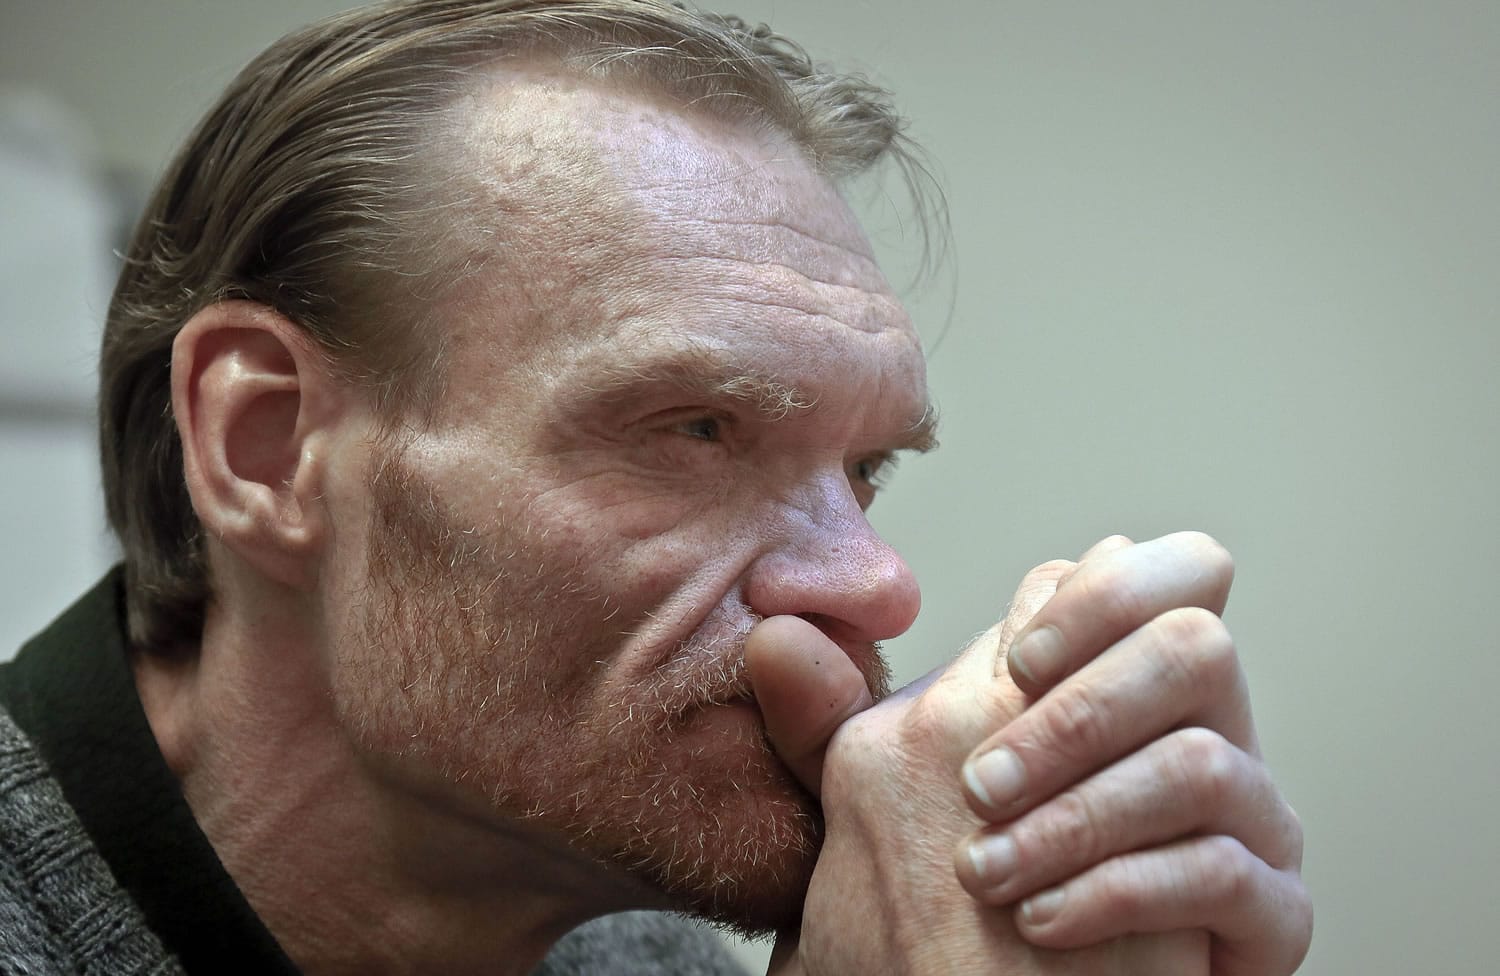 In this May 29, 2014 photo, Ken Sprague, an ex-offender who was diagnosed with HIV in 1984, listens during an interview in New York. Health professionals view imprisonment as a potentially vital chance to offer HIV testing and connect HIV-positive people to health care perhaps better than they've ever had before. Yet these experts worry about what happens post-release.